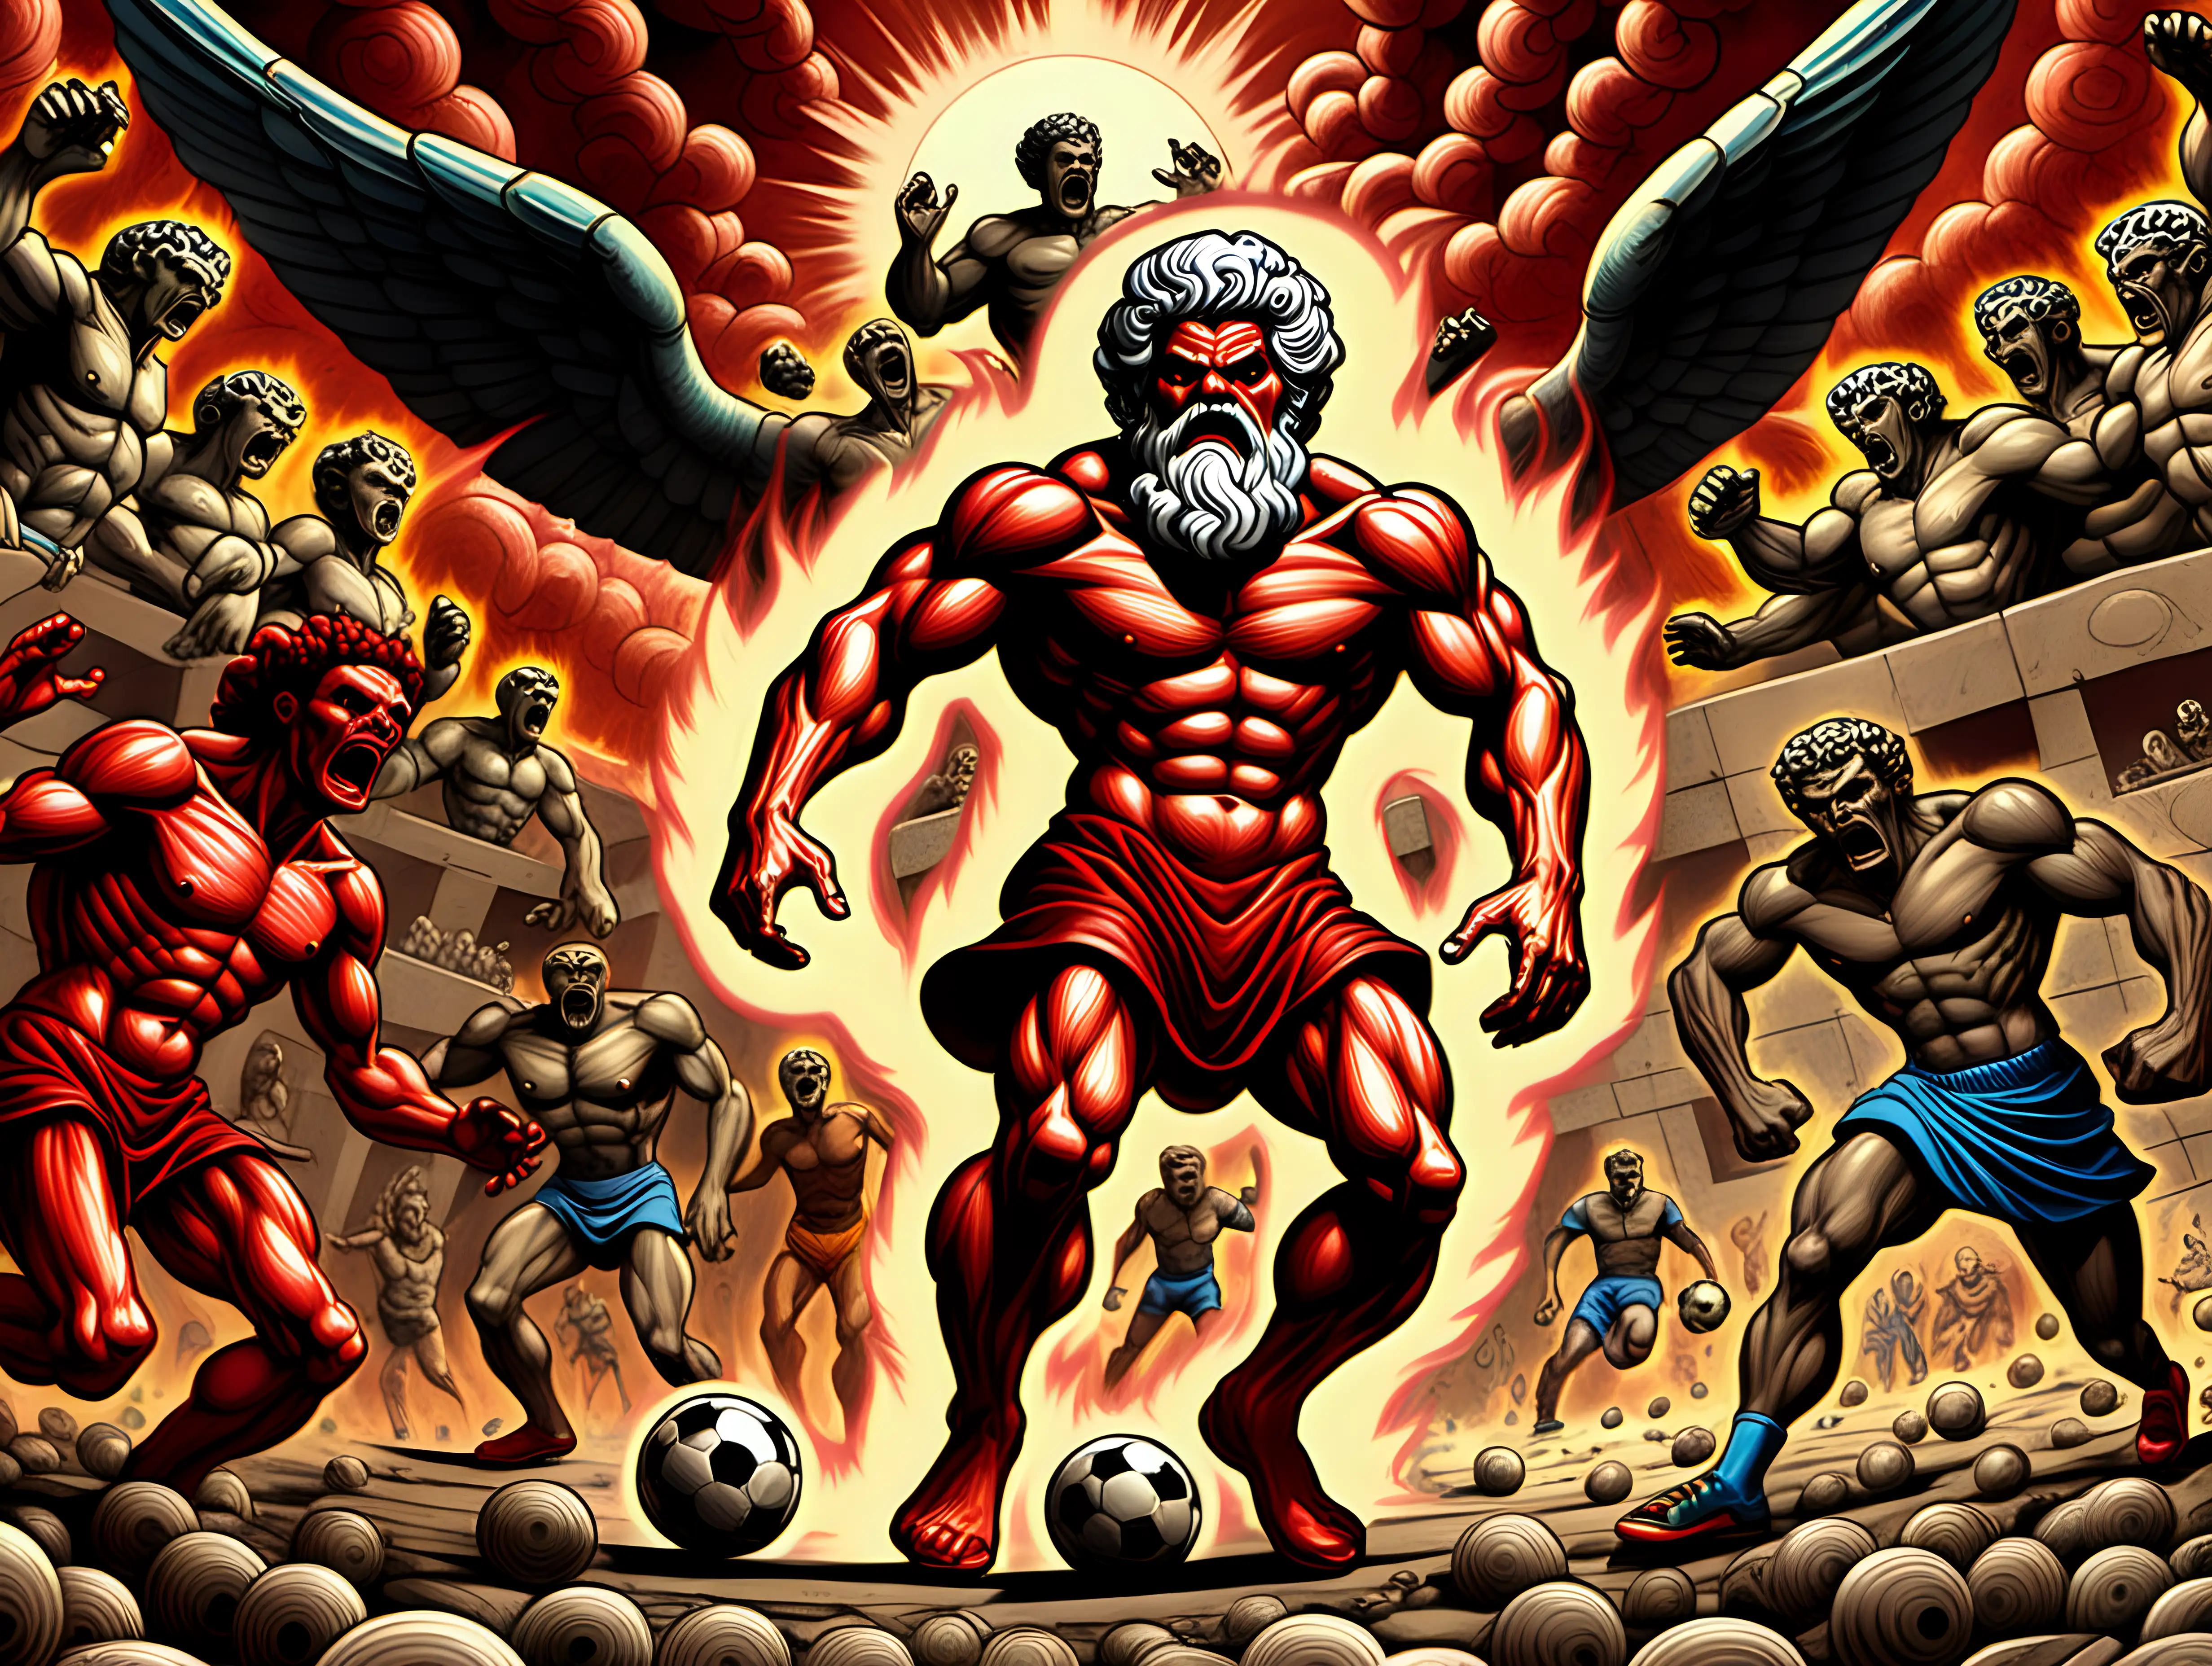 Zeus playing soccer against demons in  Hell in style of Jack Kirby